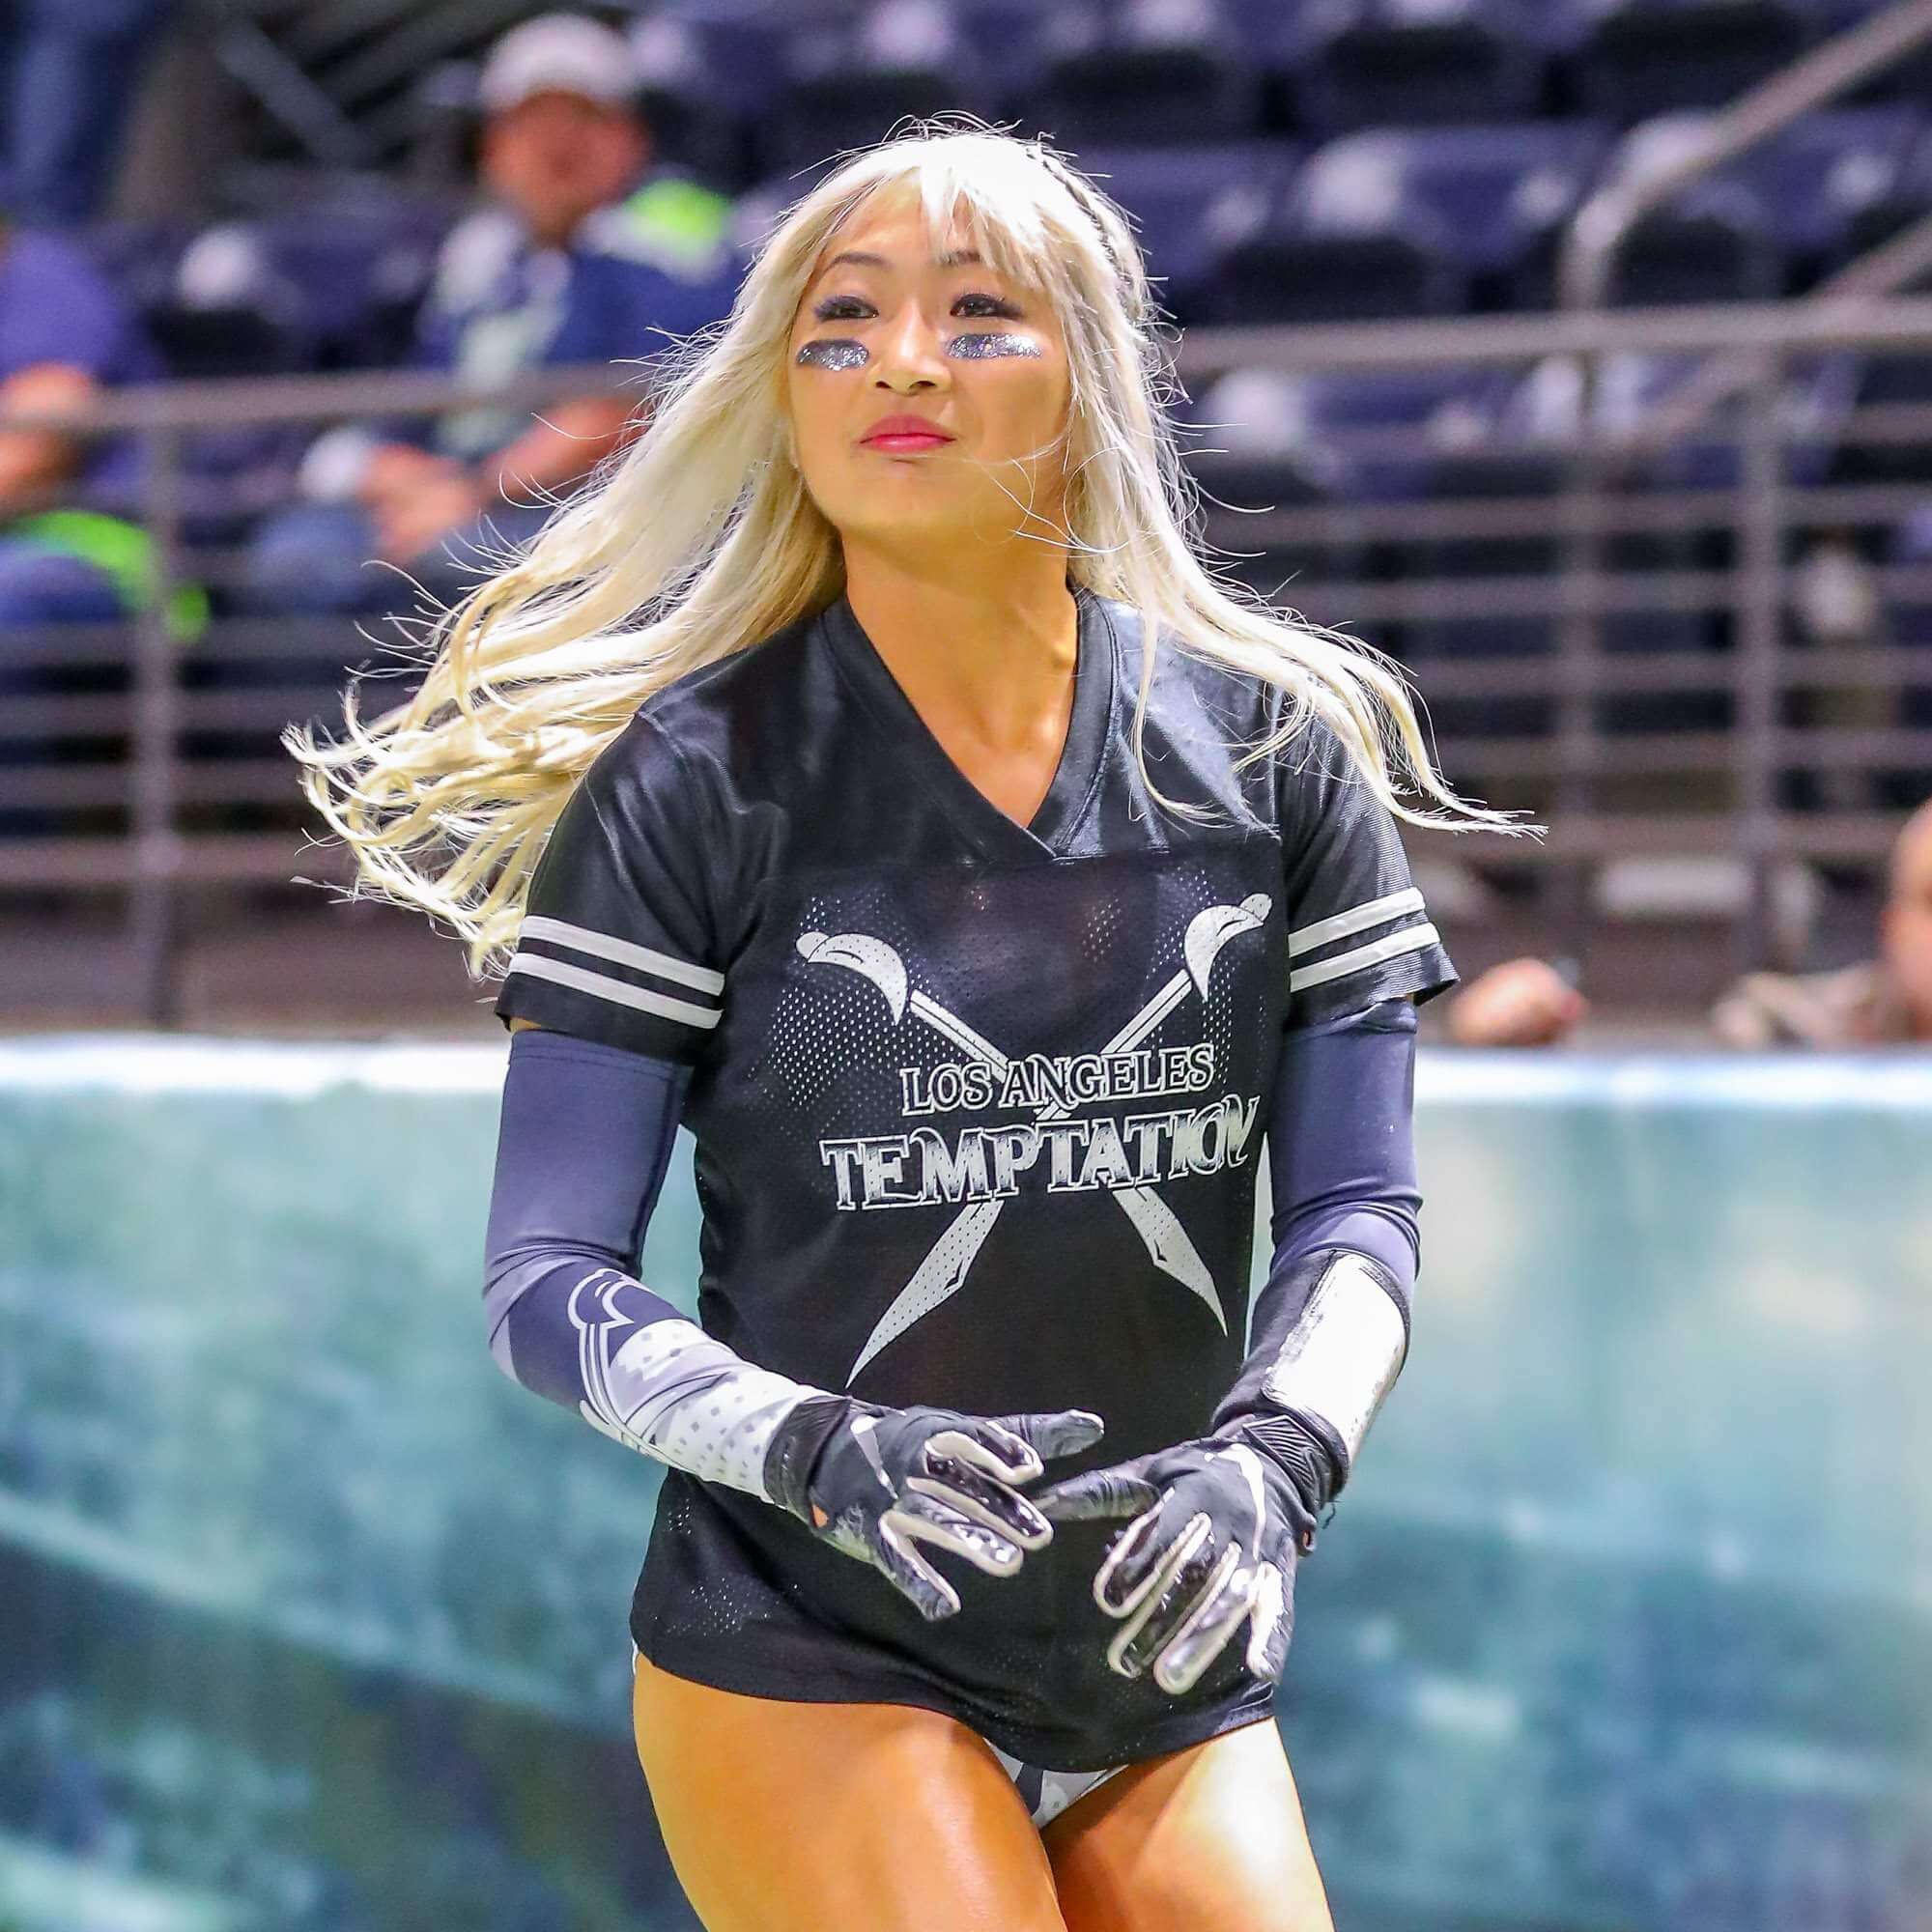 The Legends Football League Beautiful Women And Football, Need We Say Anymore! 51